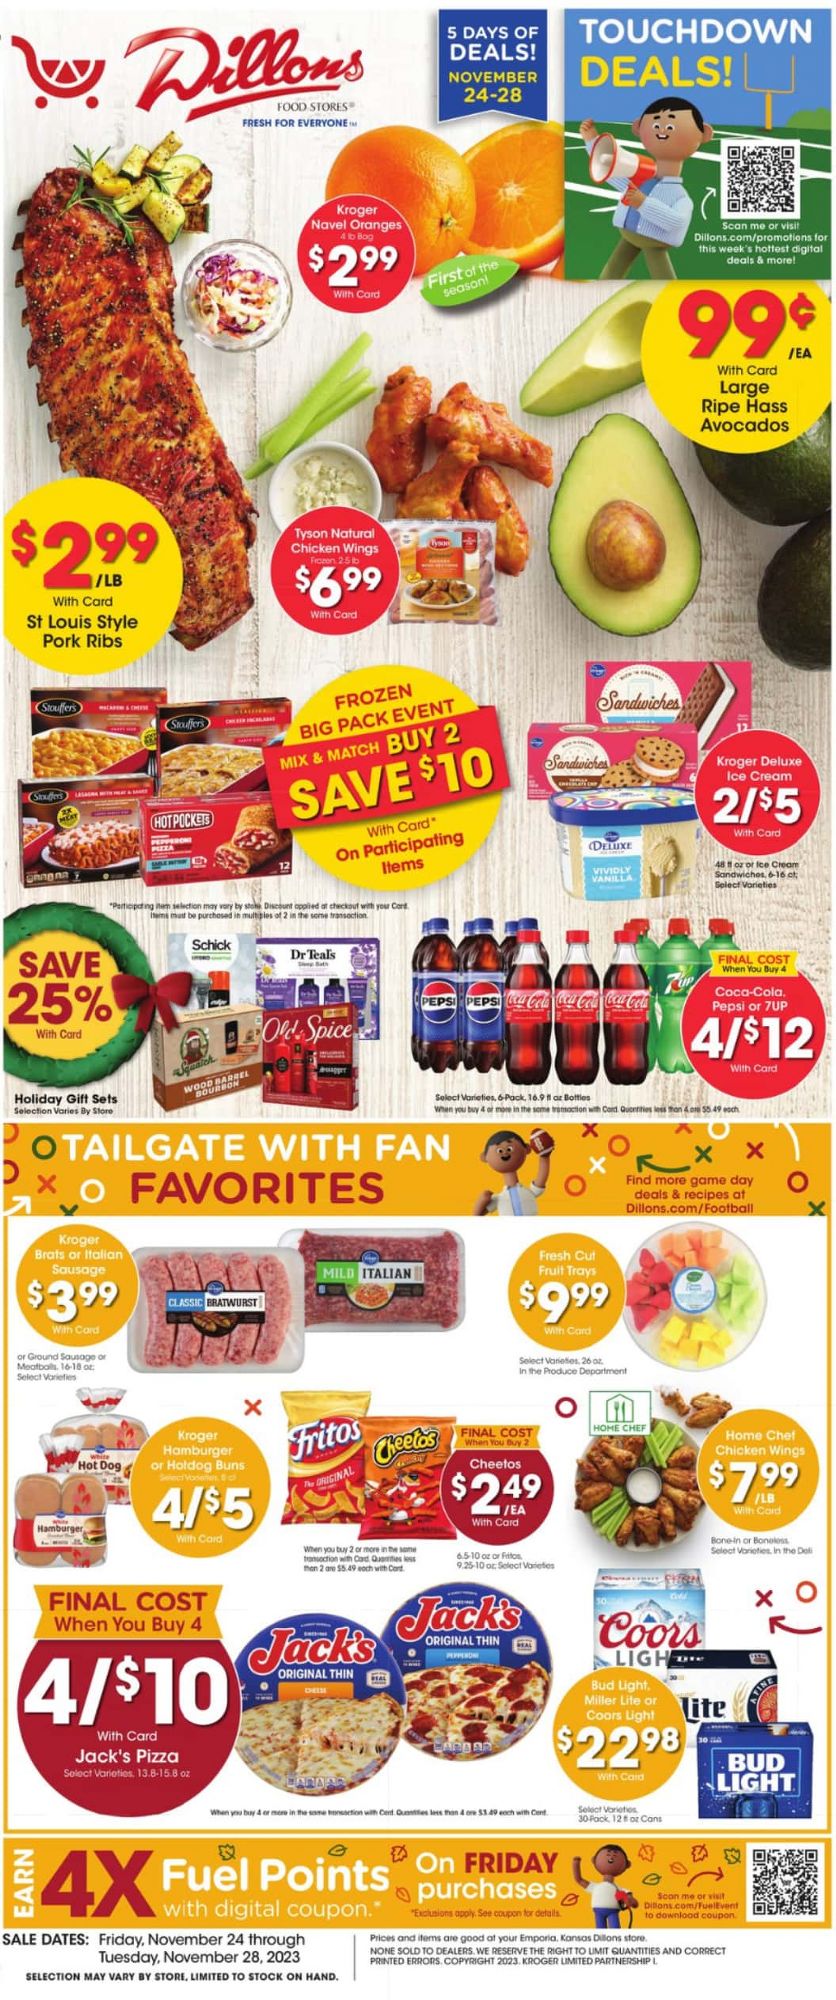 Dillons Black Friday July 2024 Weekly Sales, Deals, Discounts and Digital Coupons.